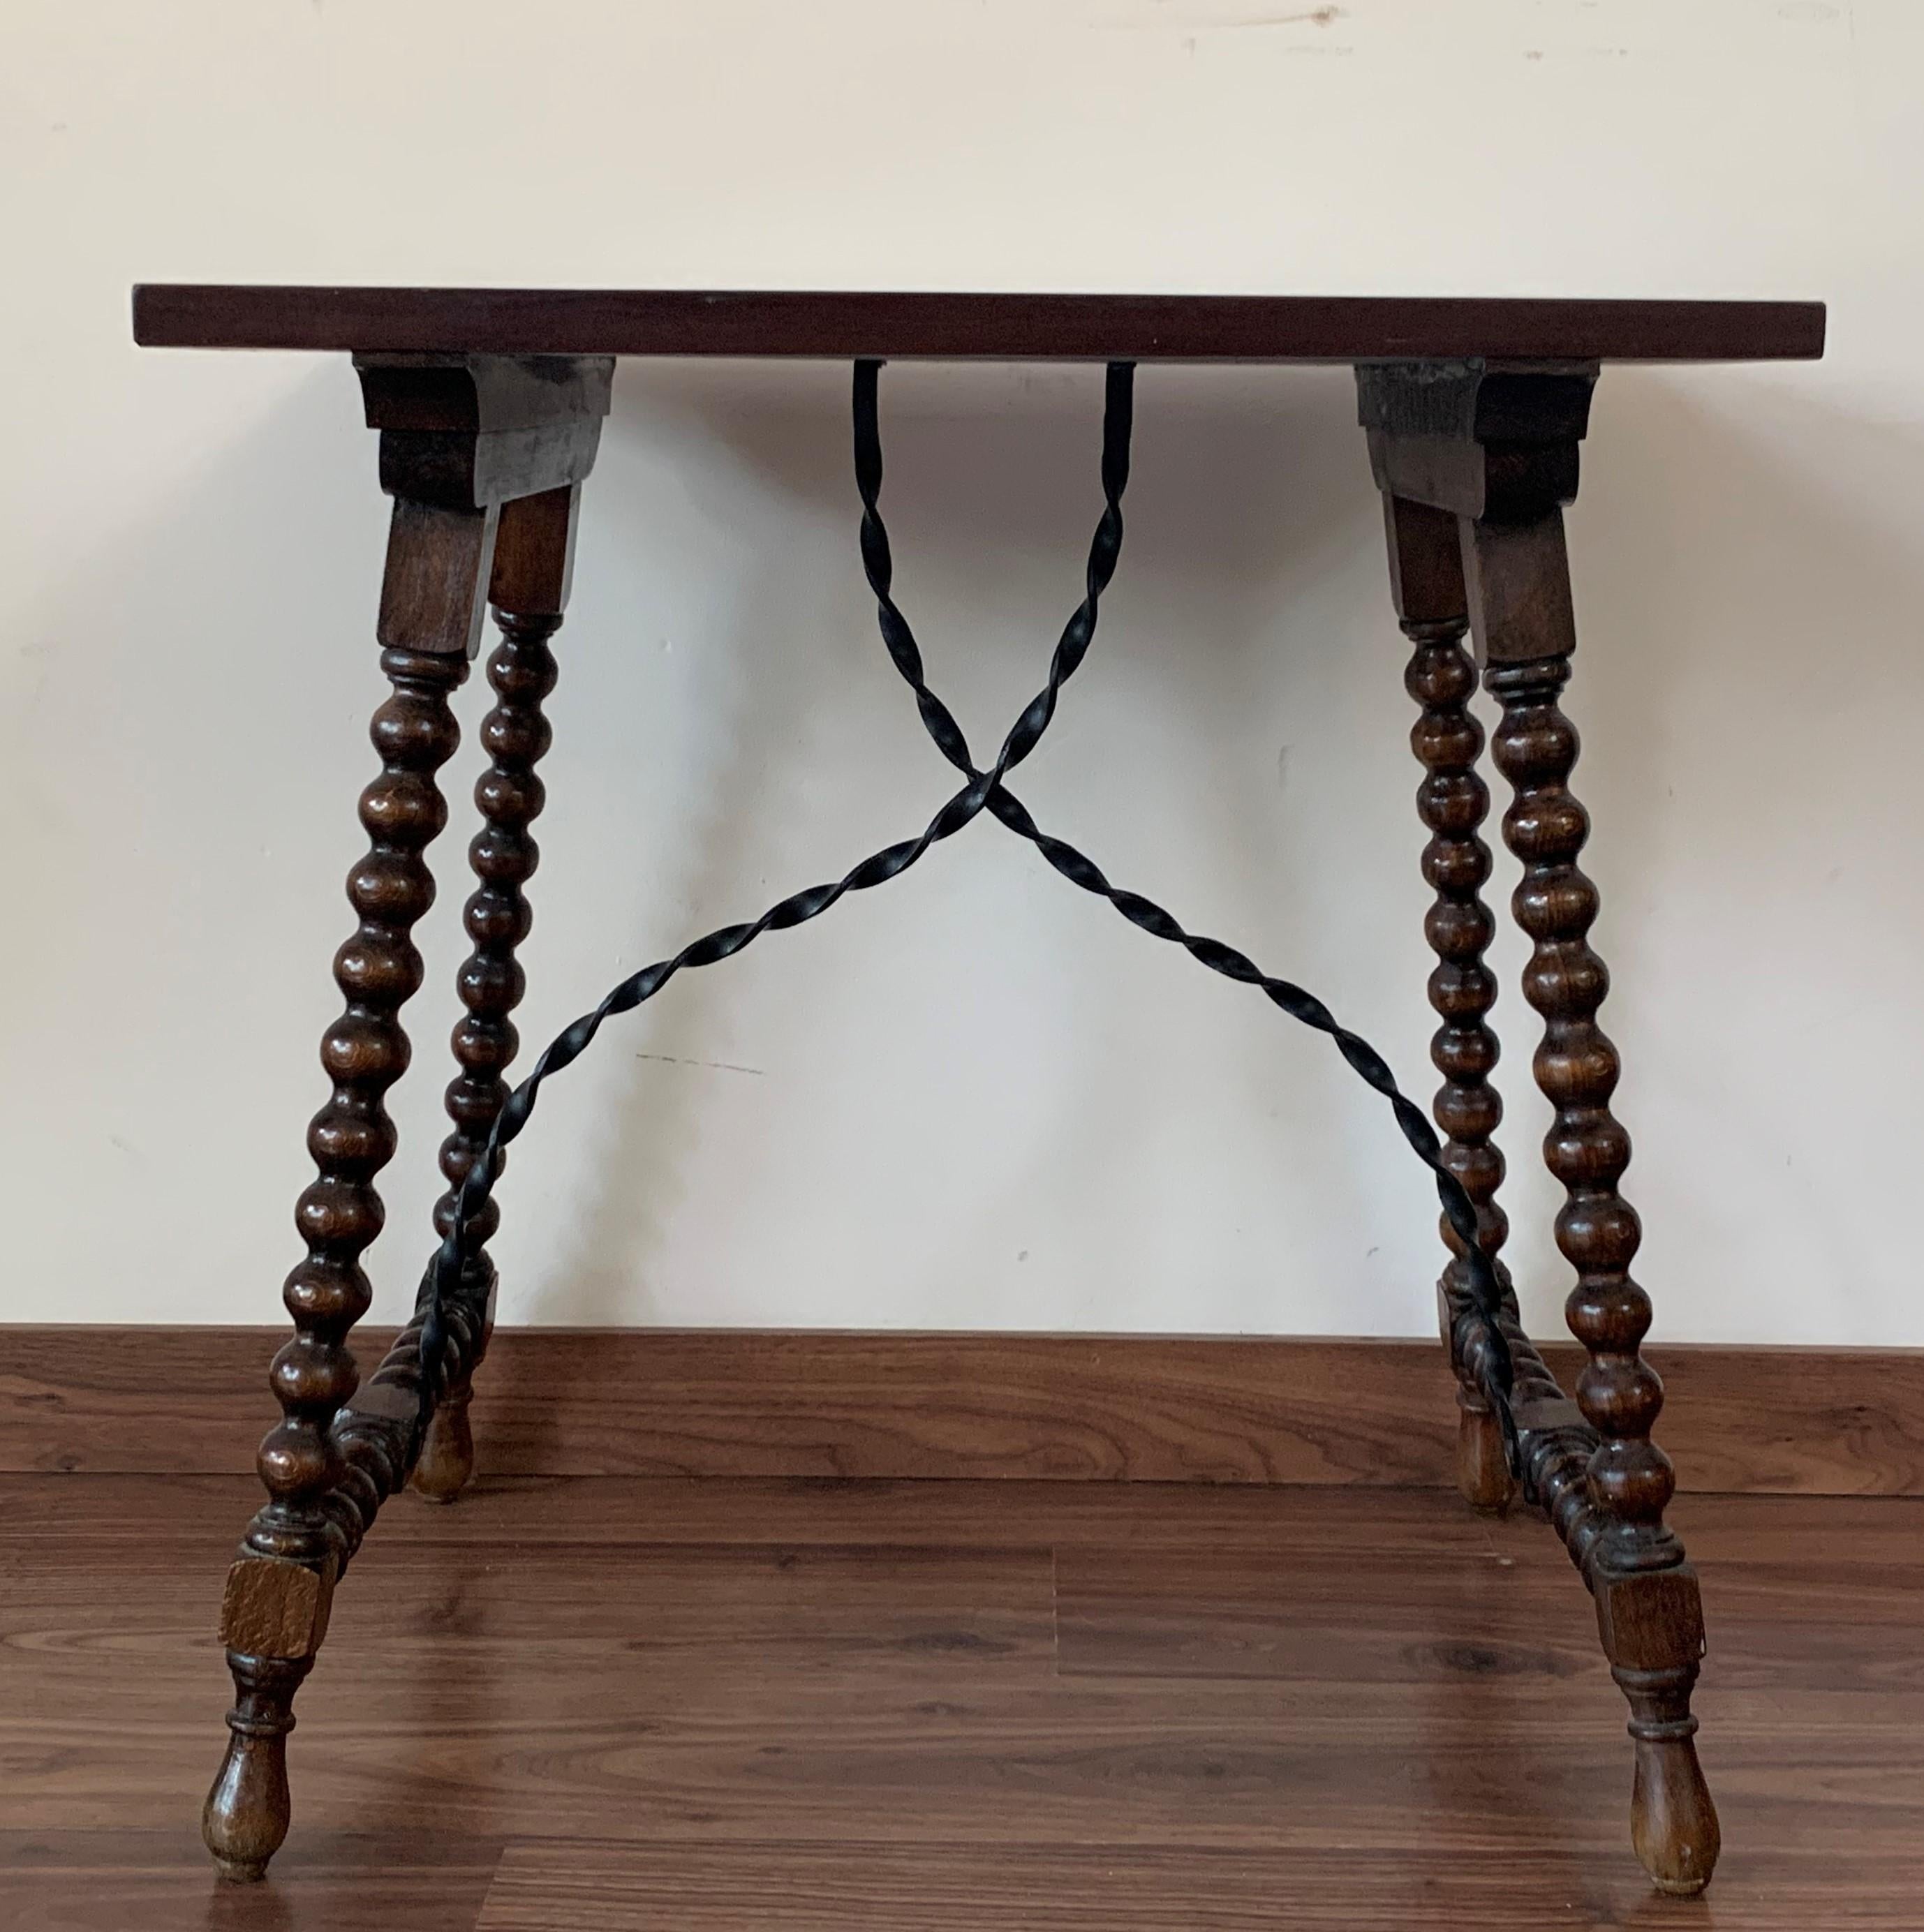 19th century Baroque Spanish side table with marquetry geometricals figures
19th century Spanish trestle table in walnut. This piece has a great scale, lovely turned legs and beautiful marquetry top. This table could be used as an end table,